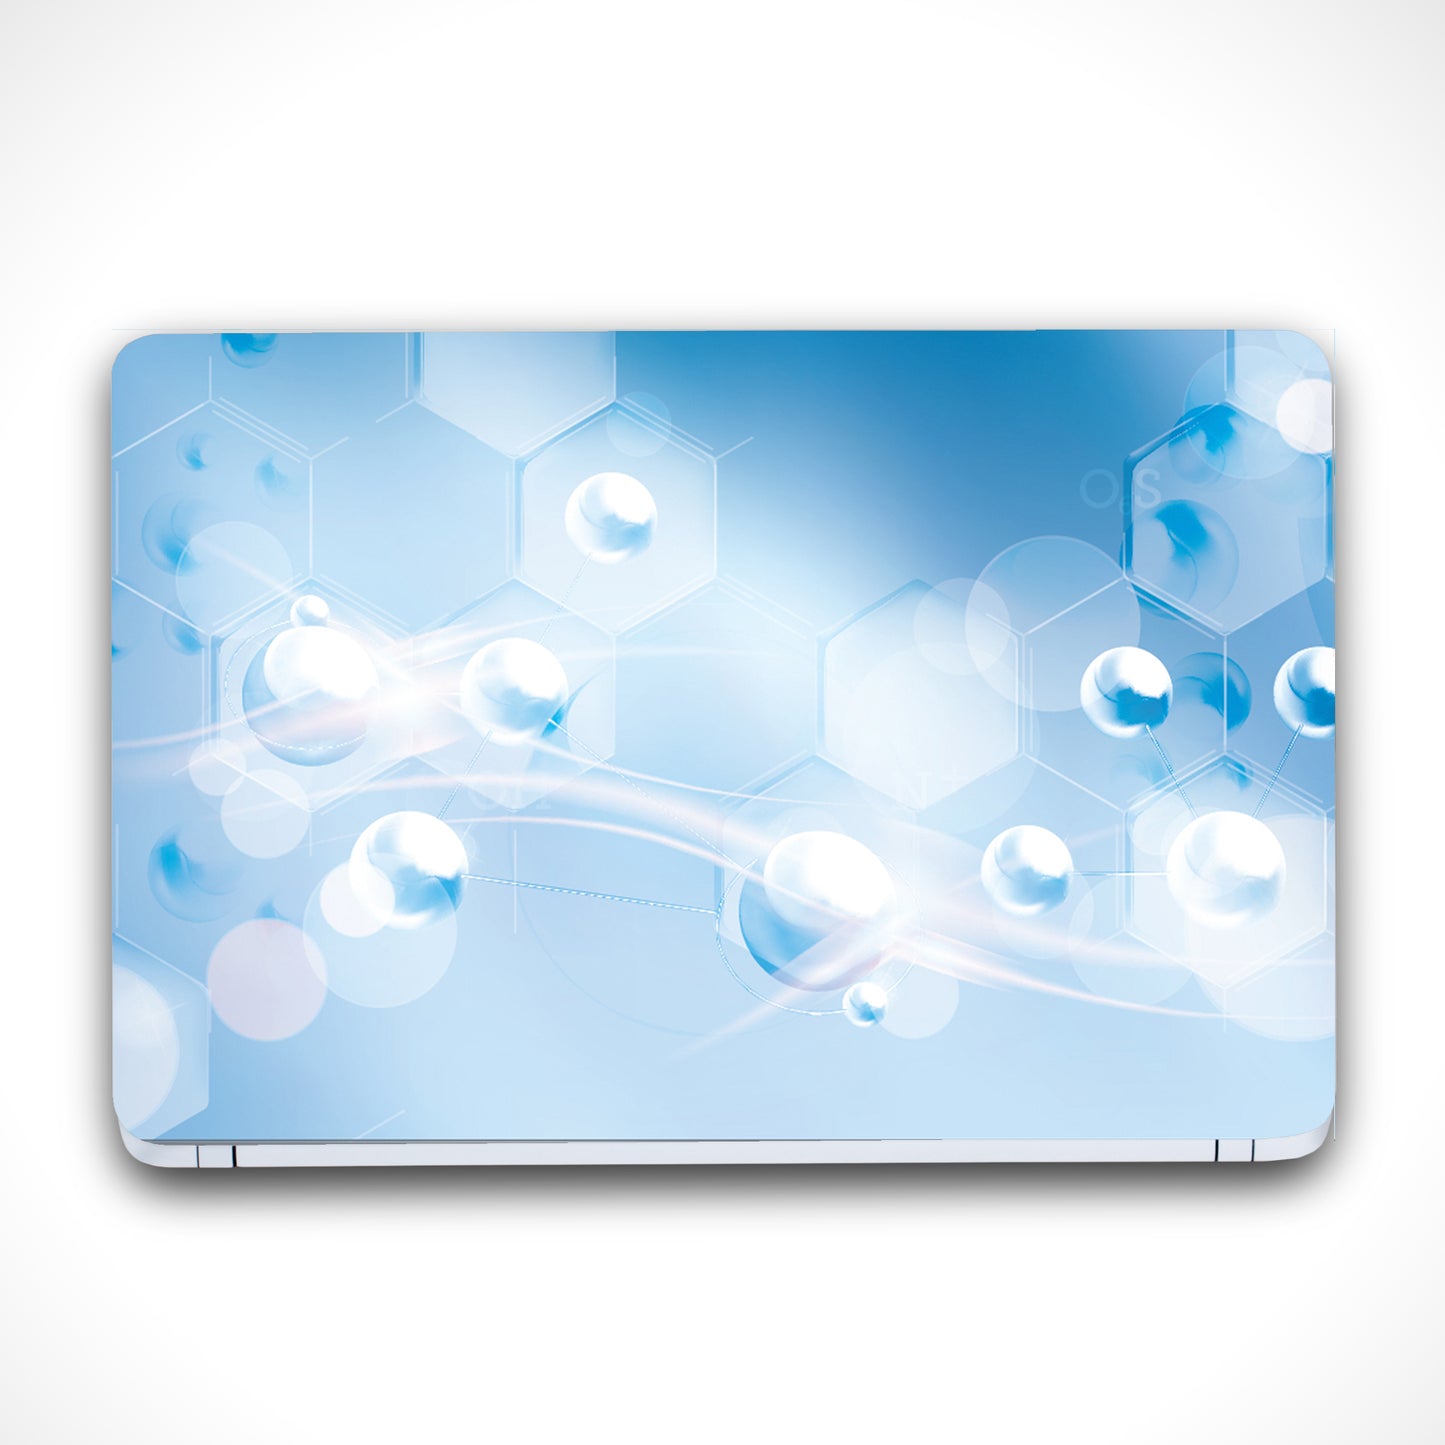 iberry's Vinyl Laptop Skin Sticker Collection for Dell, Hp, Toshiba, Acer, Asus & All Models (Upto 15.6 inches) -09